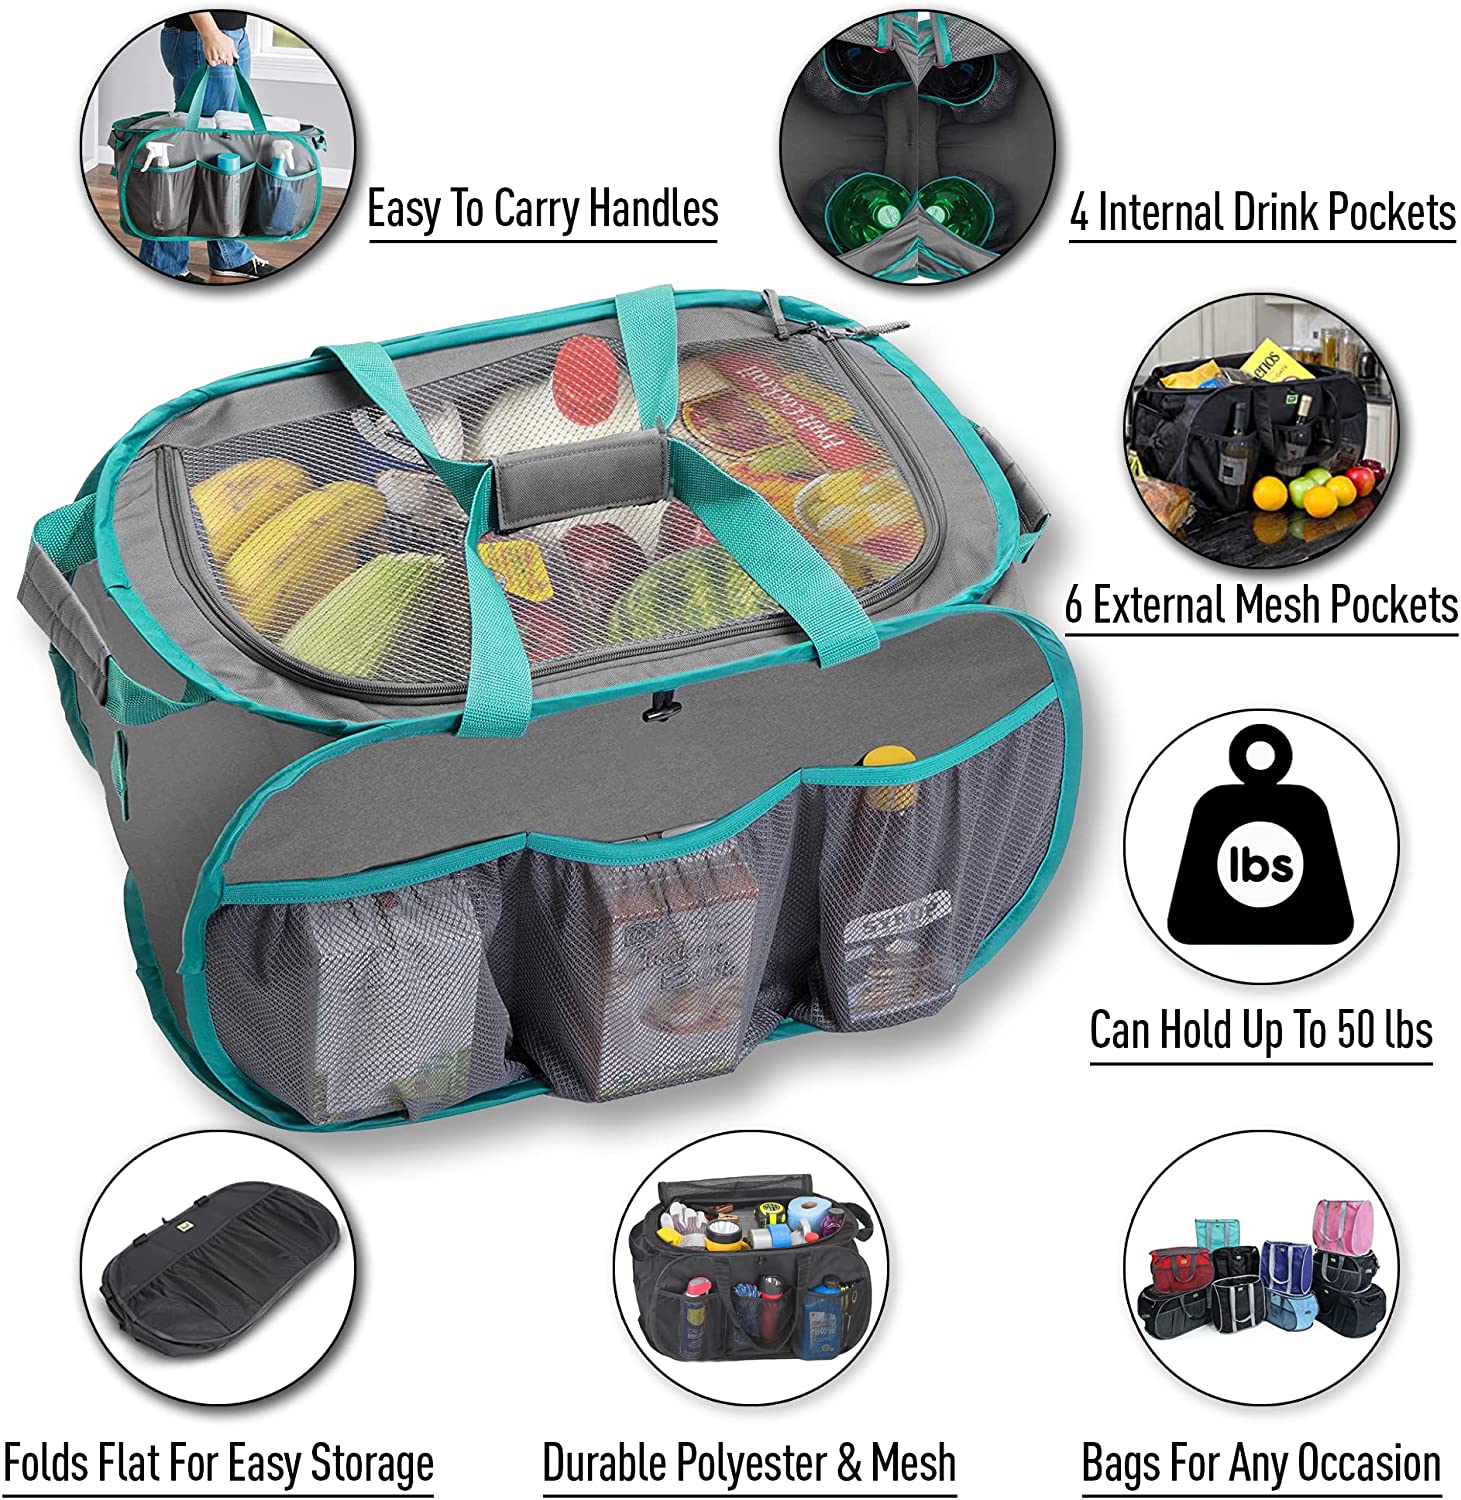 Smart Design Pop Up Trunk Organizer with Easy Carry Handles, Side Pockets, and Zipper Top - Set of 2 - 23 inch - Holds 50 lbs. - Durable Fabric